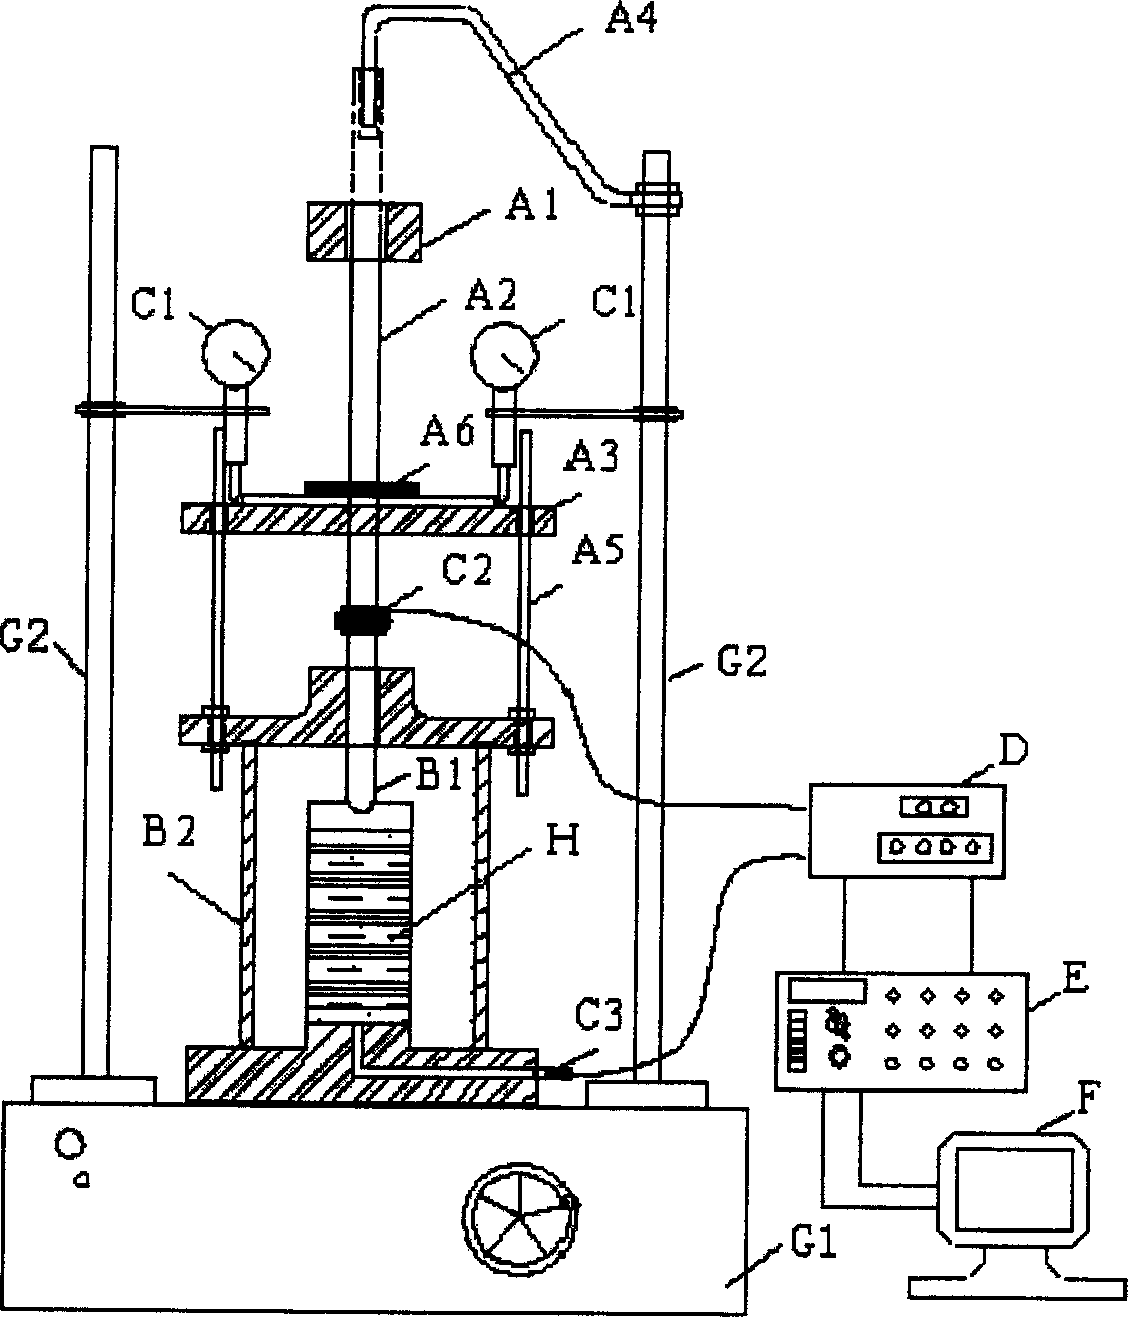 Indoor dynamic drainage consolidation test system and its method